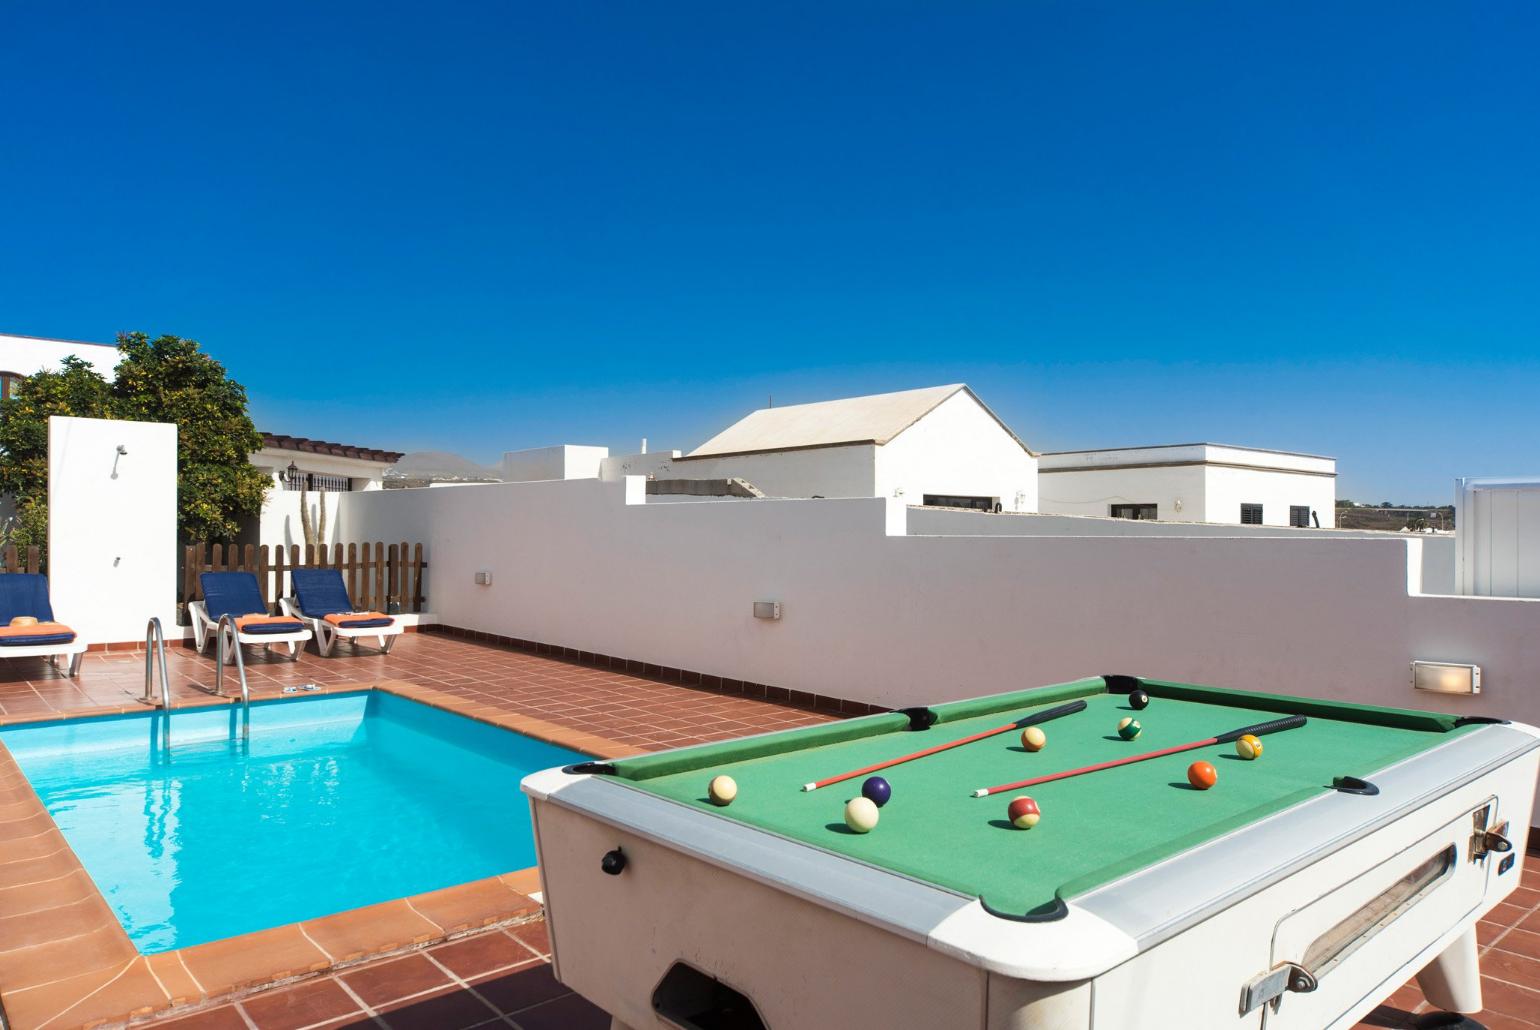 Private pool with terrace area and pool table